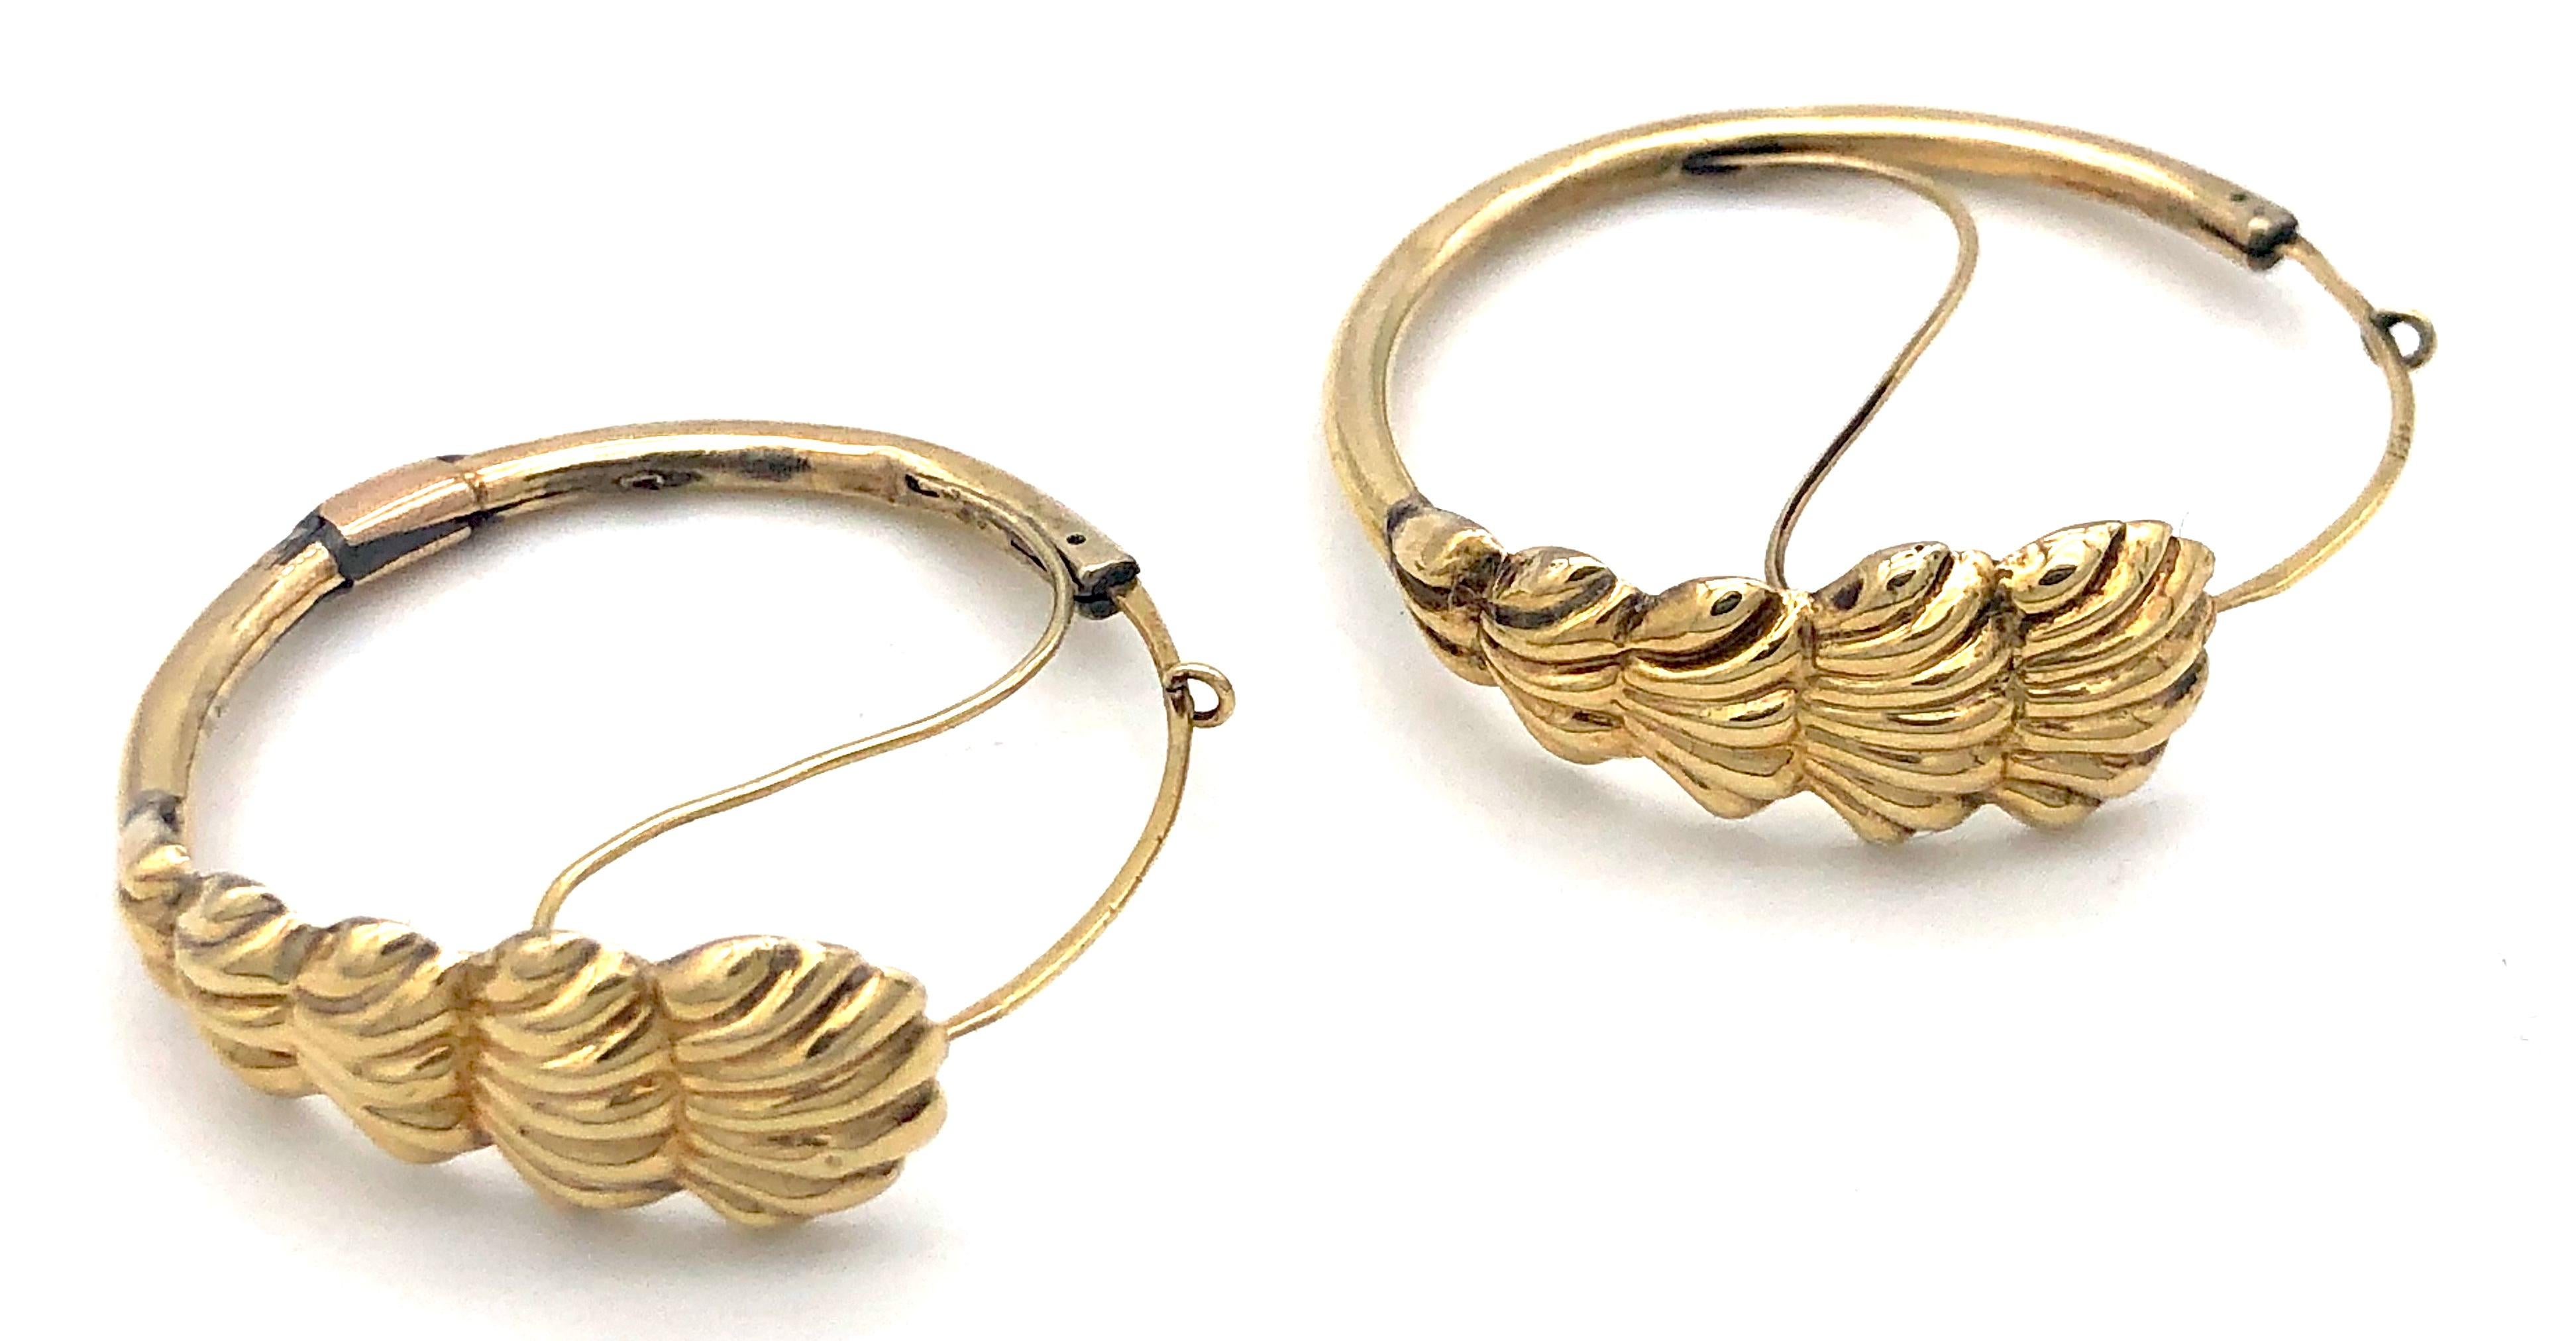 This rare pair of 14kt gold hoop earrings dates back to the second decade of the nineteenth century.
The hoops feature each five embossed scallops decreasing in size.
This timeless but wearable earrings have been much loved and worn. That makes them